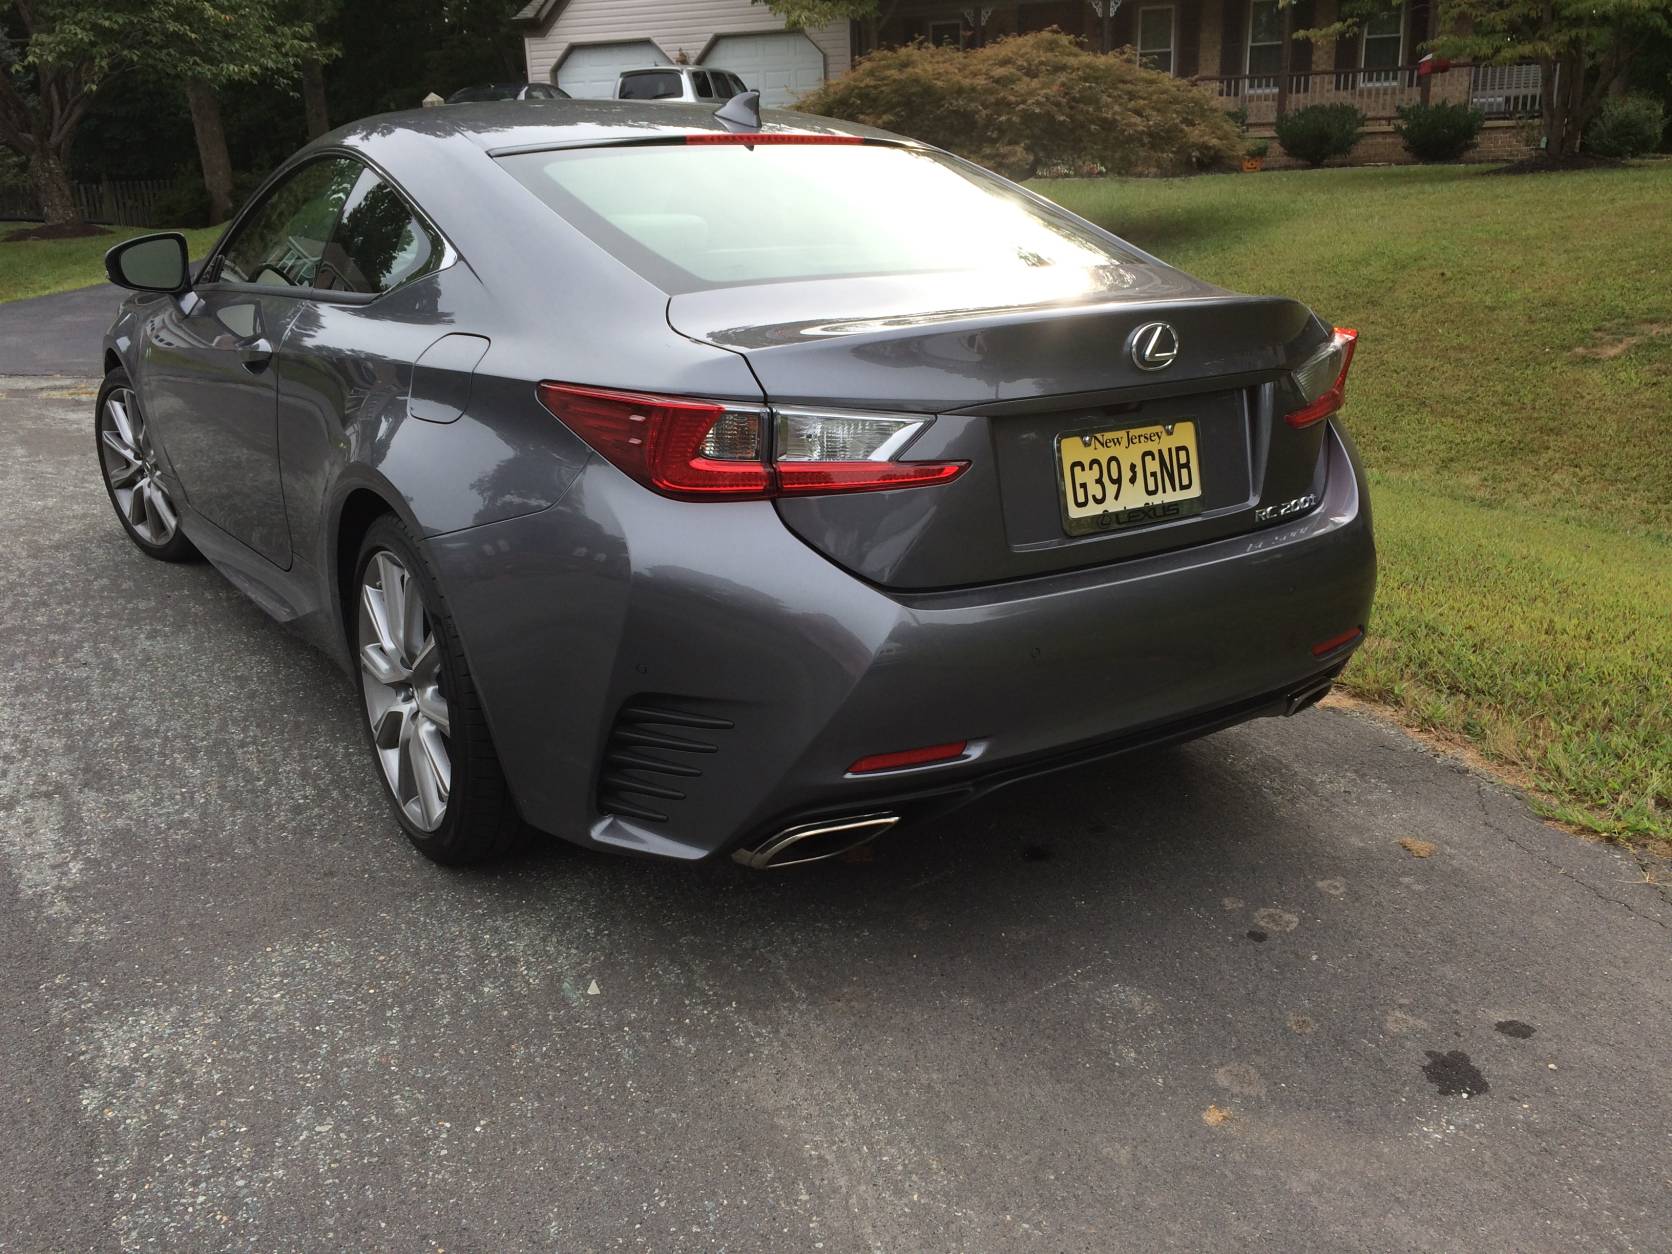 All in all, if looks are high on the list for your next car, the Lexus RC 200t coupe is worth your time.(WTOP/Mike Parris)